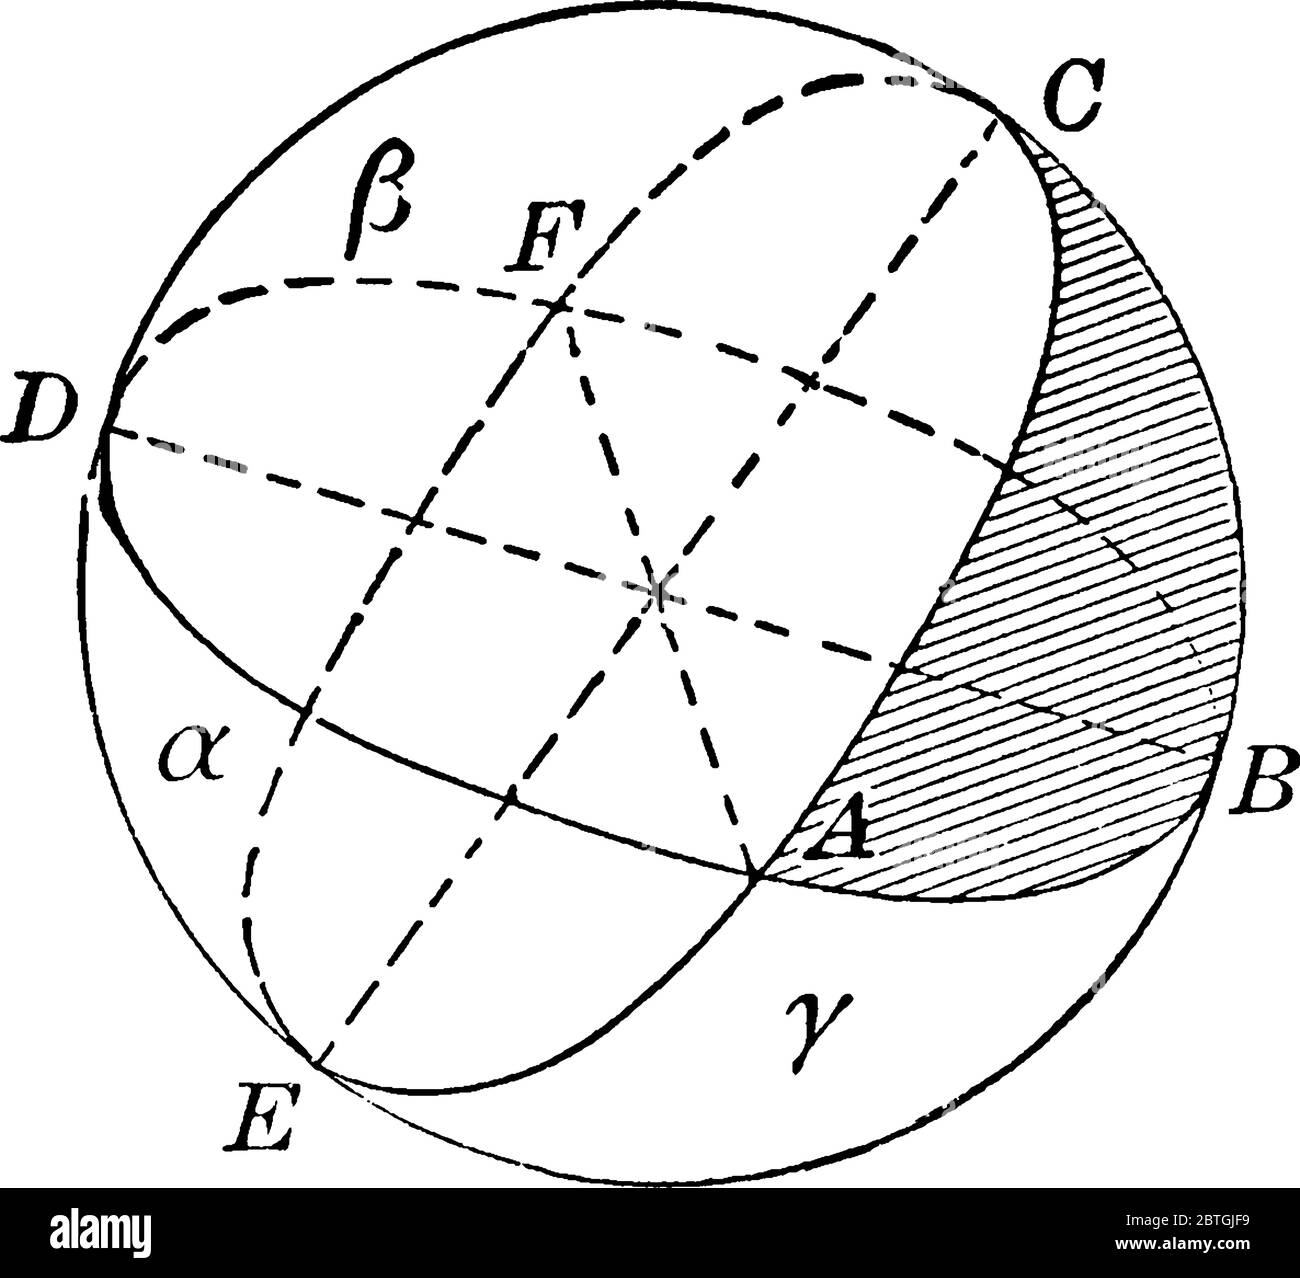 A spherical triangle formed on the surface of a sphere by three great circular arcs intersecting pairwise in three vertices., vintage line drawing or Stock Vector